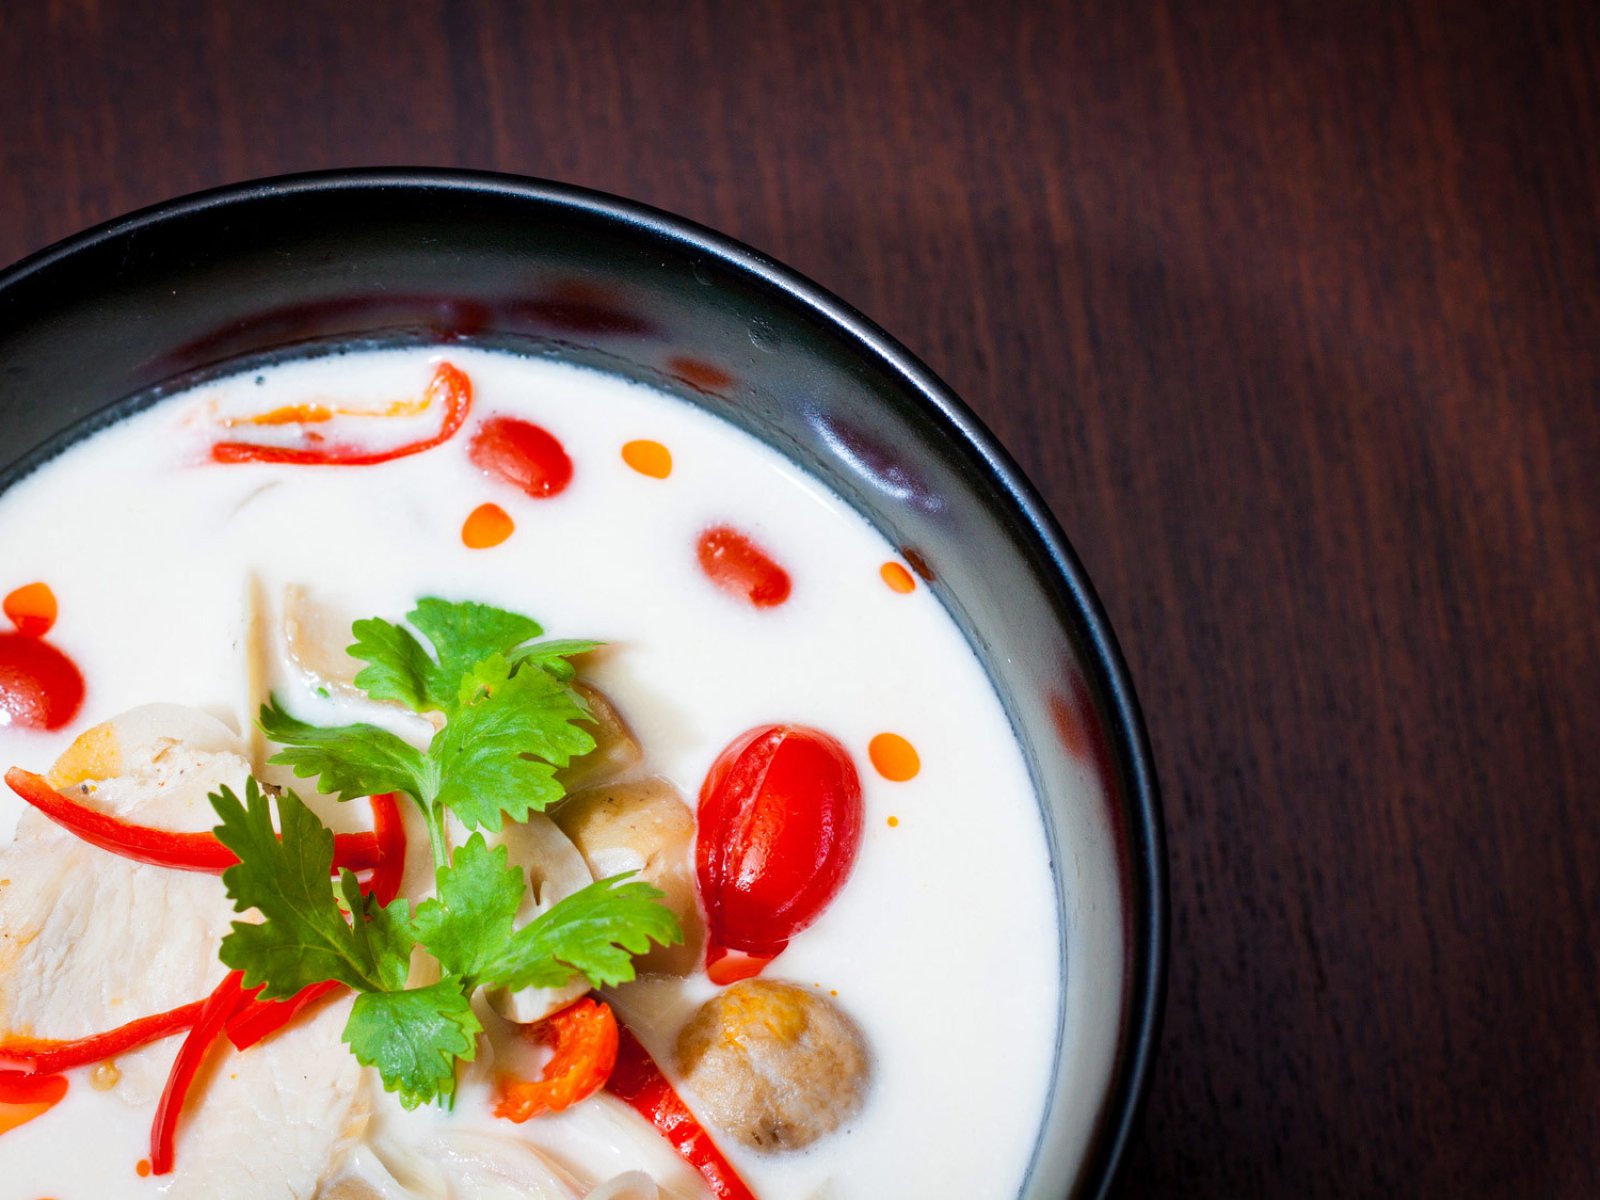 How to try Tom Kha soup in Phuket